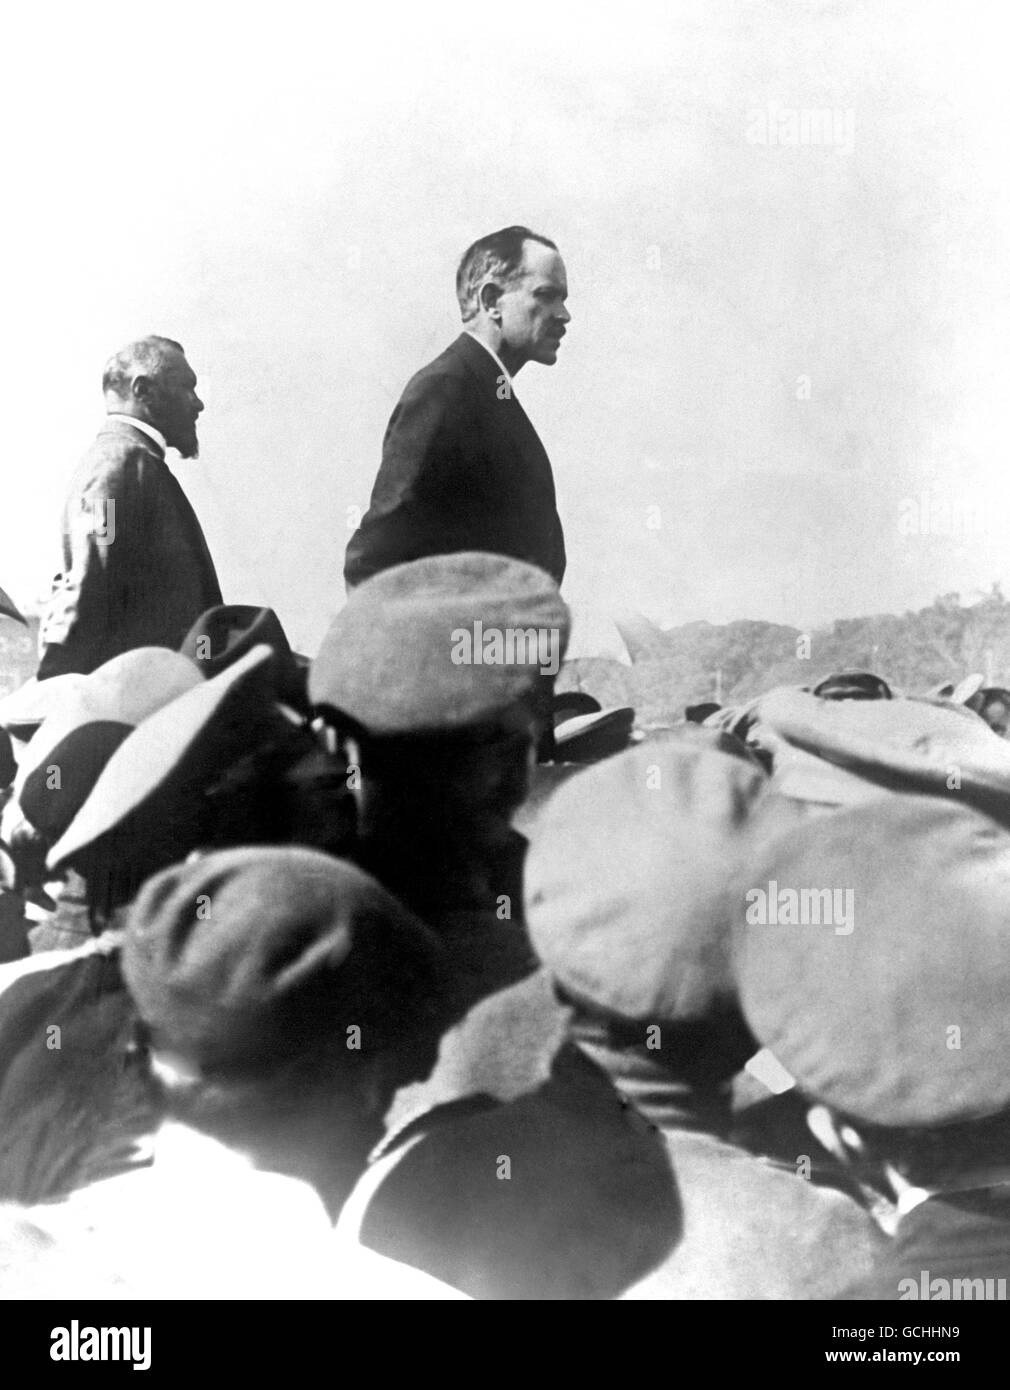 THE BOLSHEVIK LEADERS ADDRESS THEIR FOLLOWERS: LEON TROTSKY (L) AND NIKOLAI LENIN SPEAKING TO A CROWD OF WORKERS AND SOLDIERS ON THE STREETS OF PETROGRAD (FORMERLY ST. PETERSBURG). 1917. Stock Photo